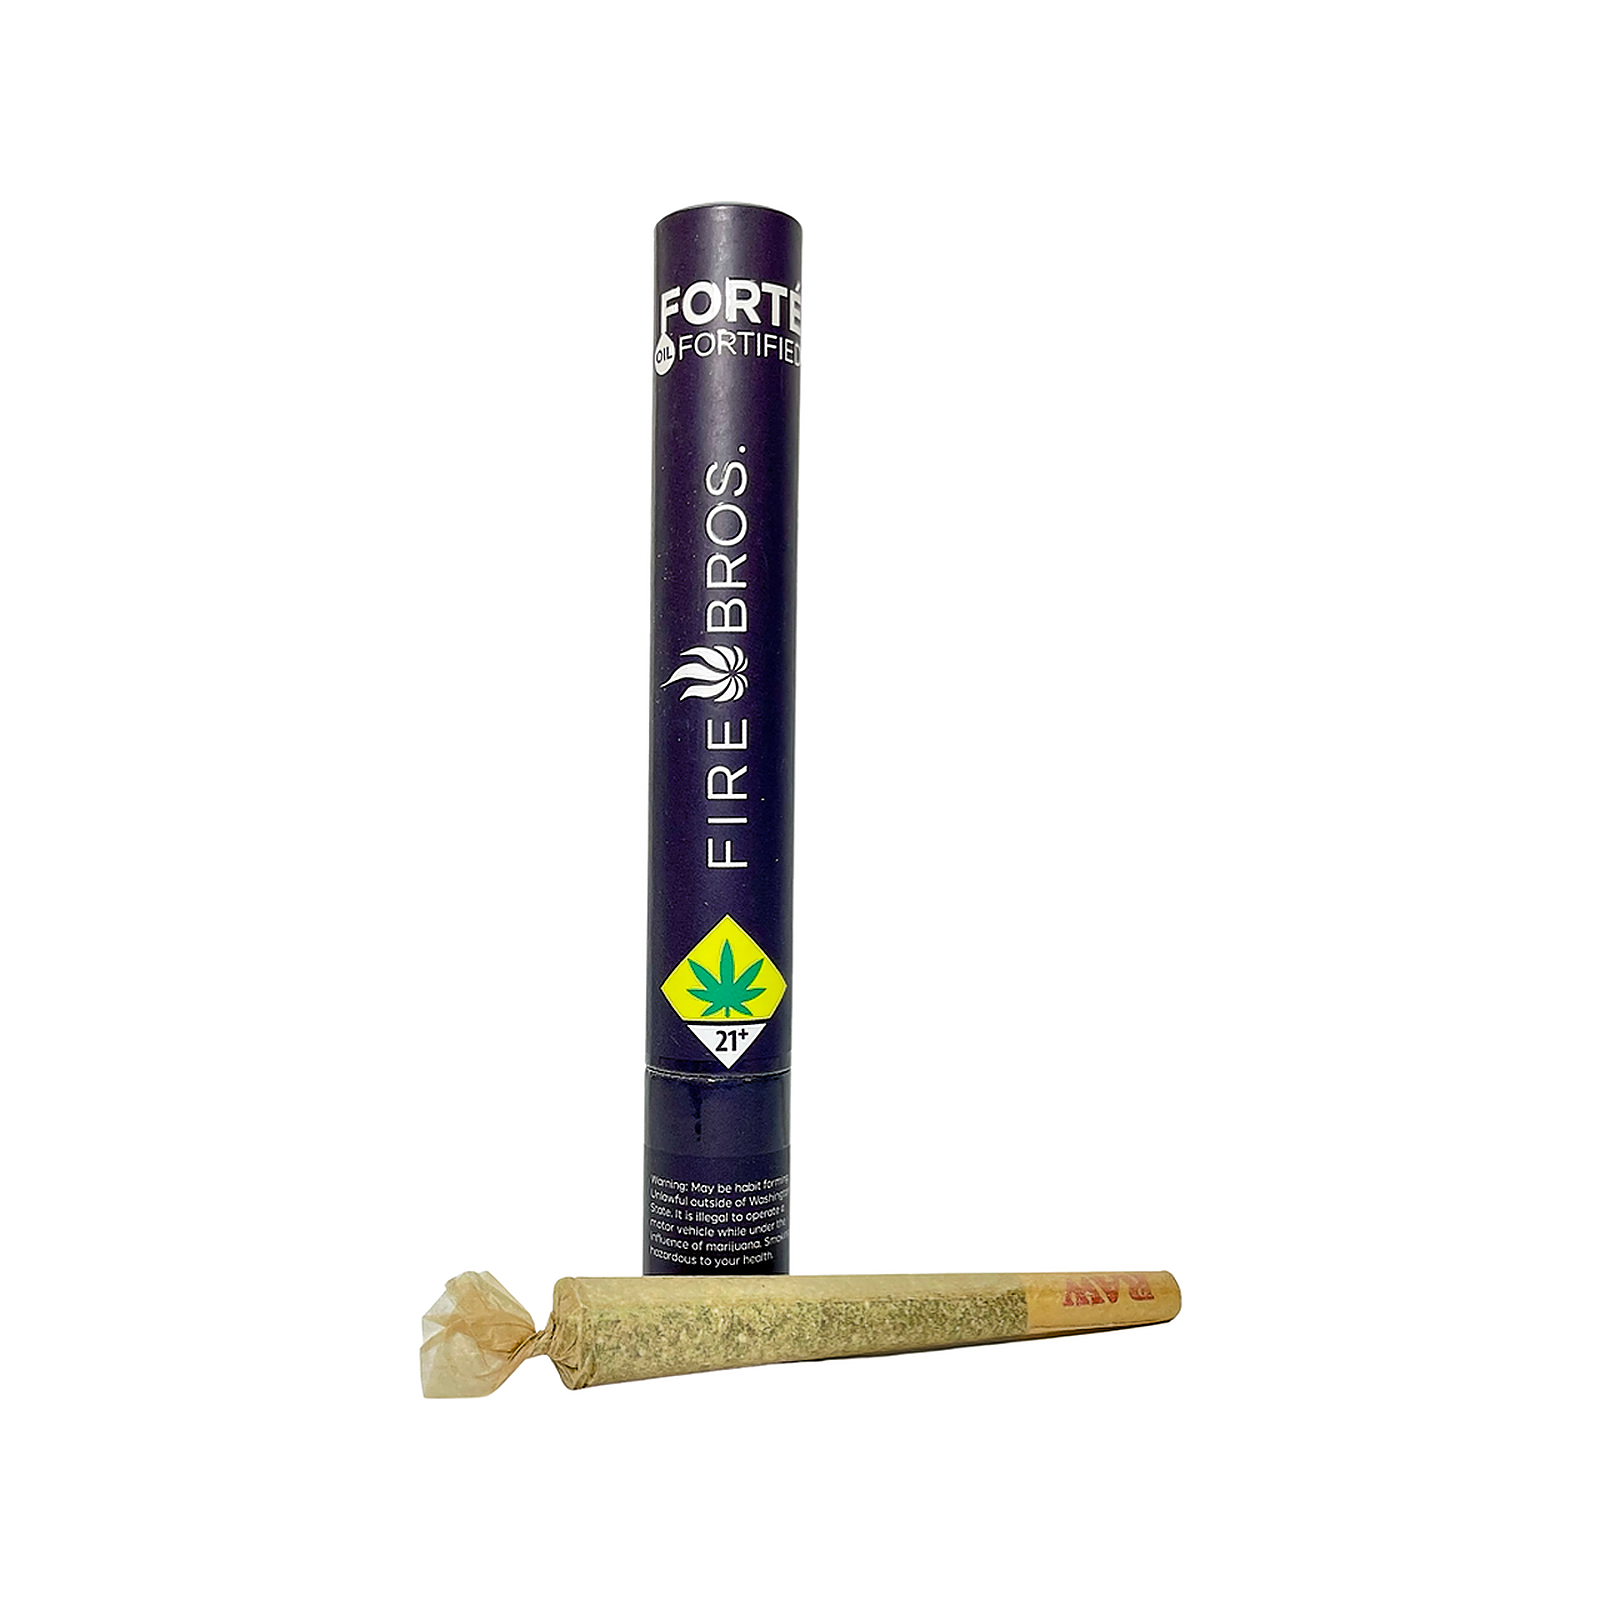 Fire Bros Forte Infused Pre-Roll Danny DeWeedo